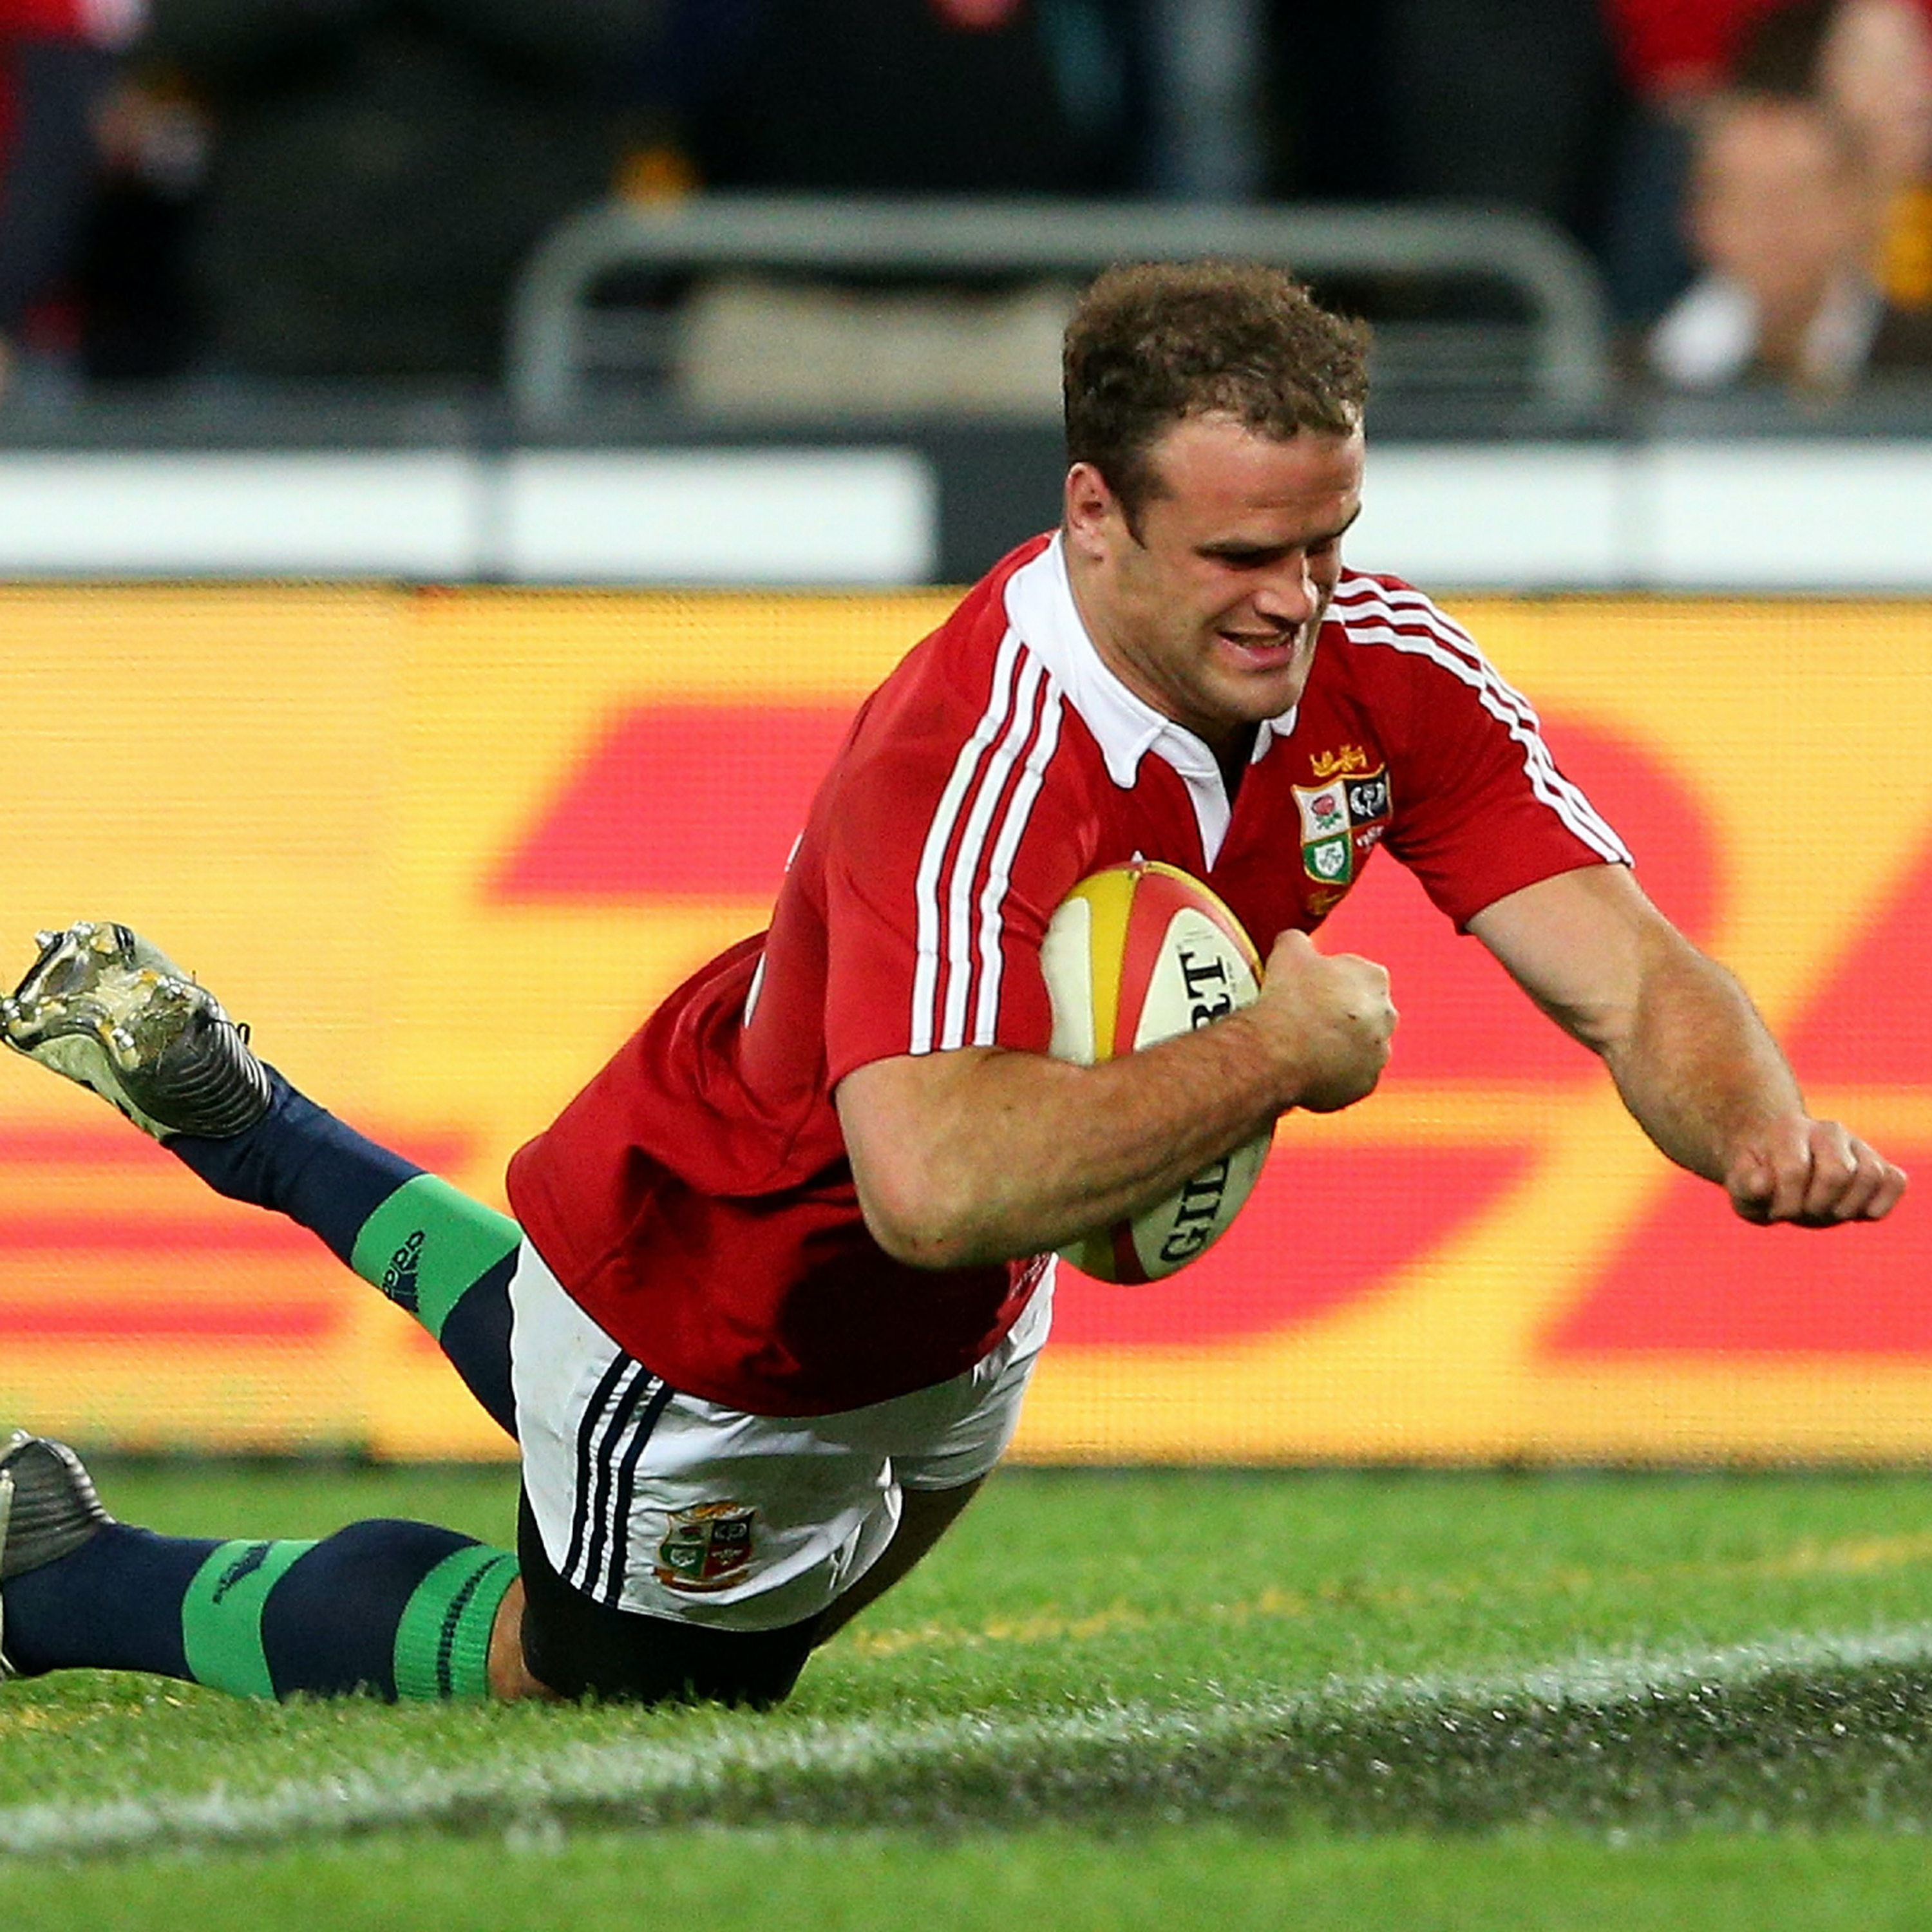 Bitesize: Jamie Roberts' rugby career, from clubs, to Wales and being a Lion